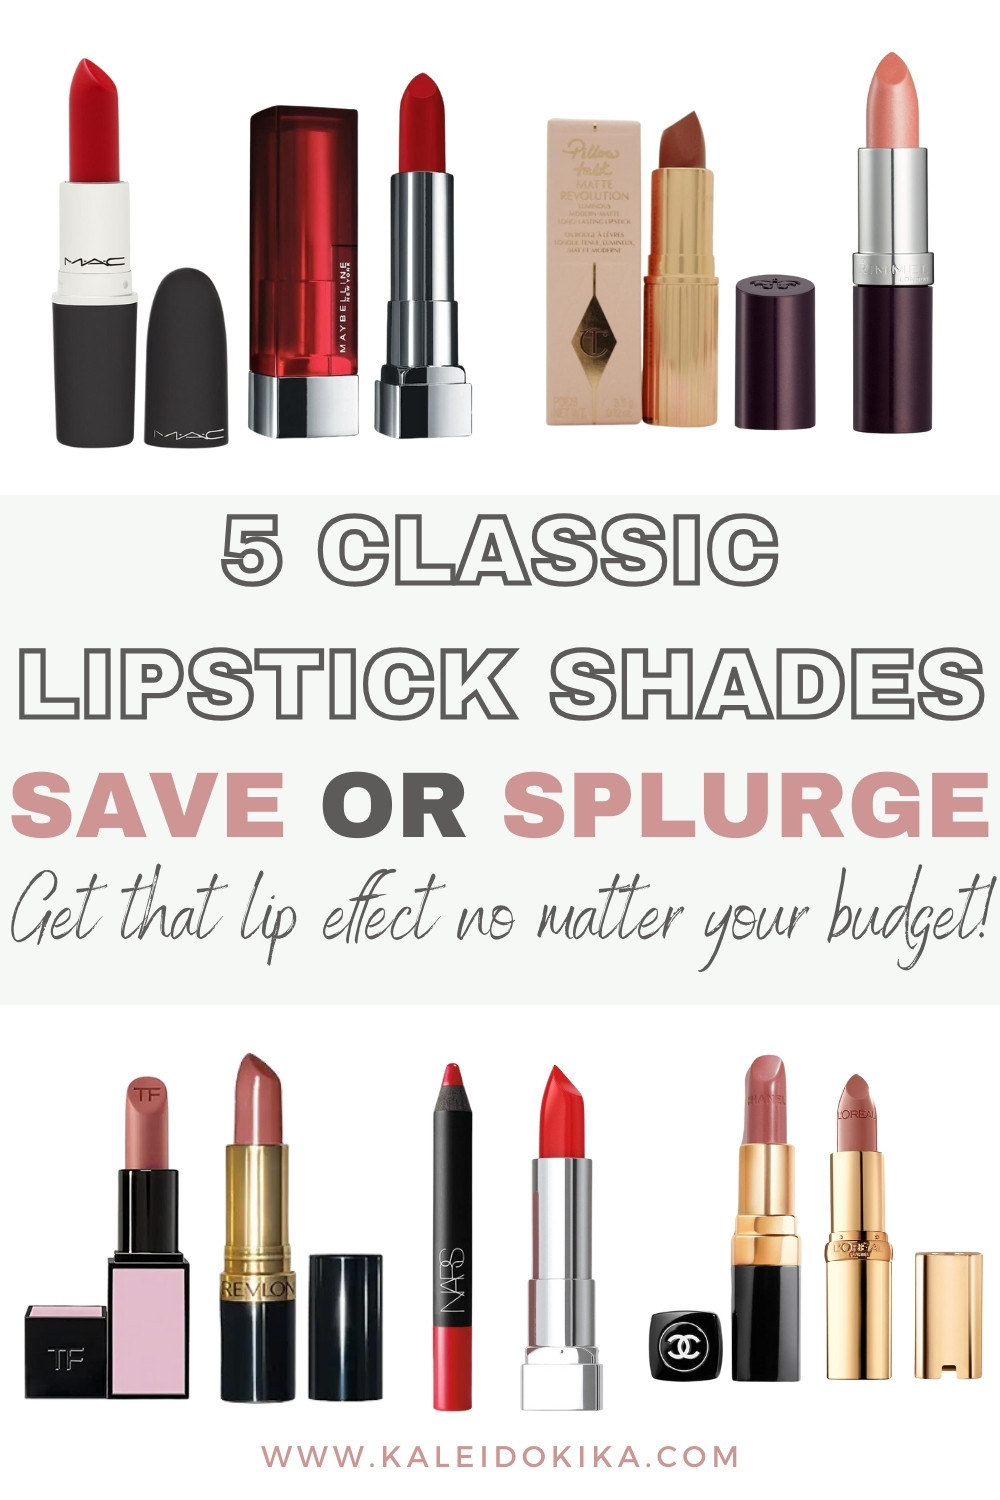 Image showing different lipsticks with expensive and less expensive options